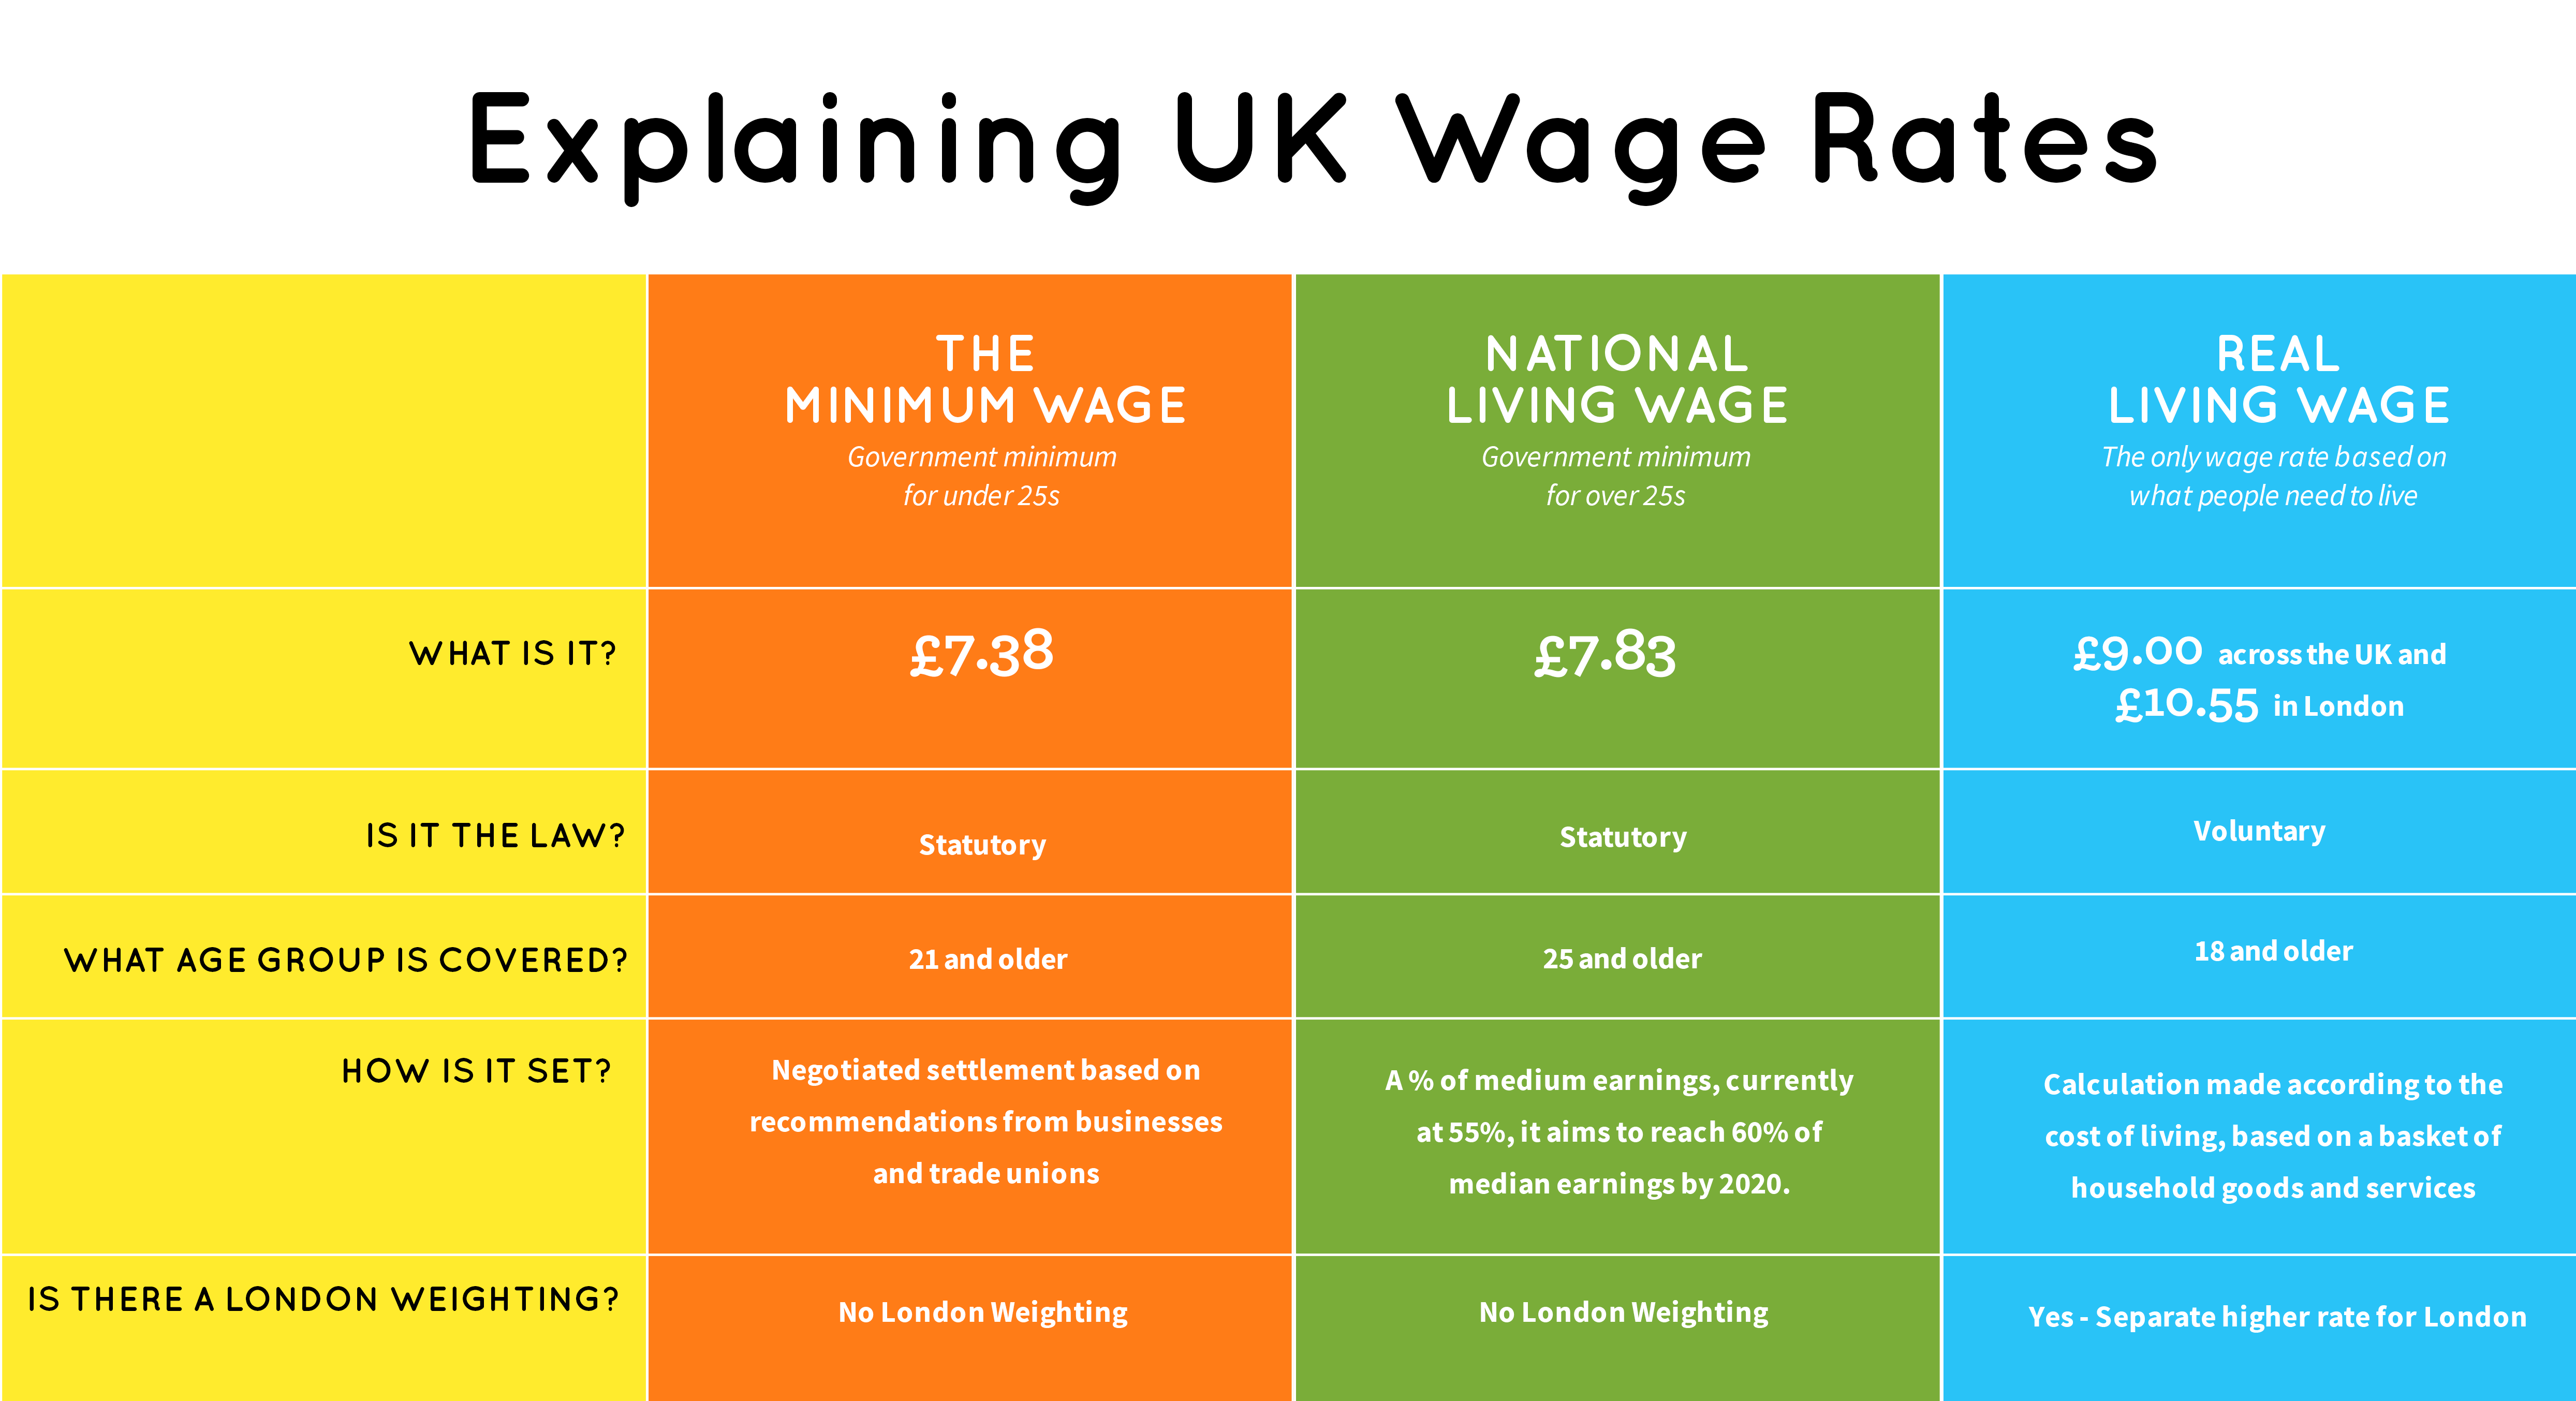 NEWS REAL LIVING WAGE INCREASES TO £9 IN UK AND £10.55 IN LONDON AS